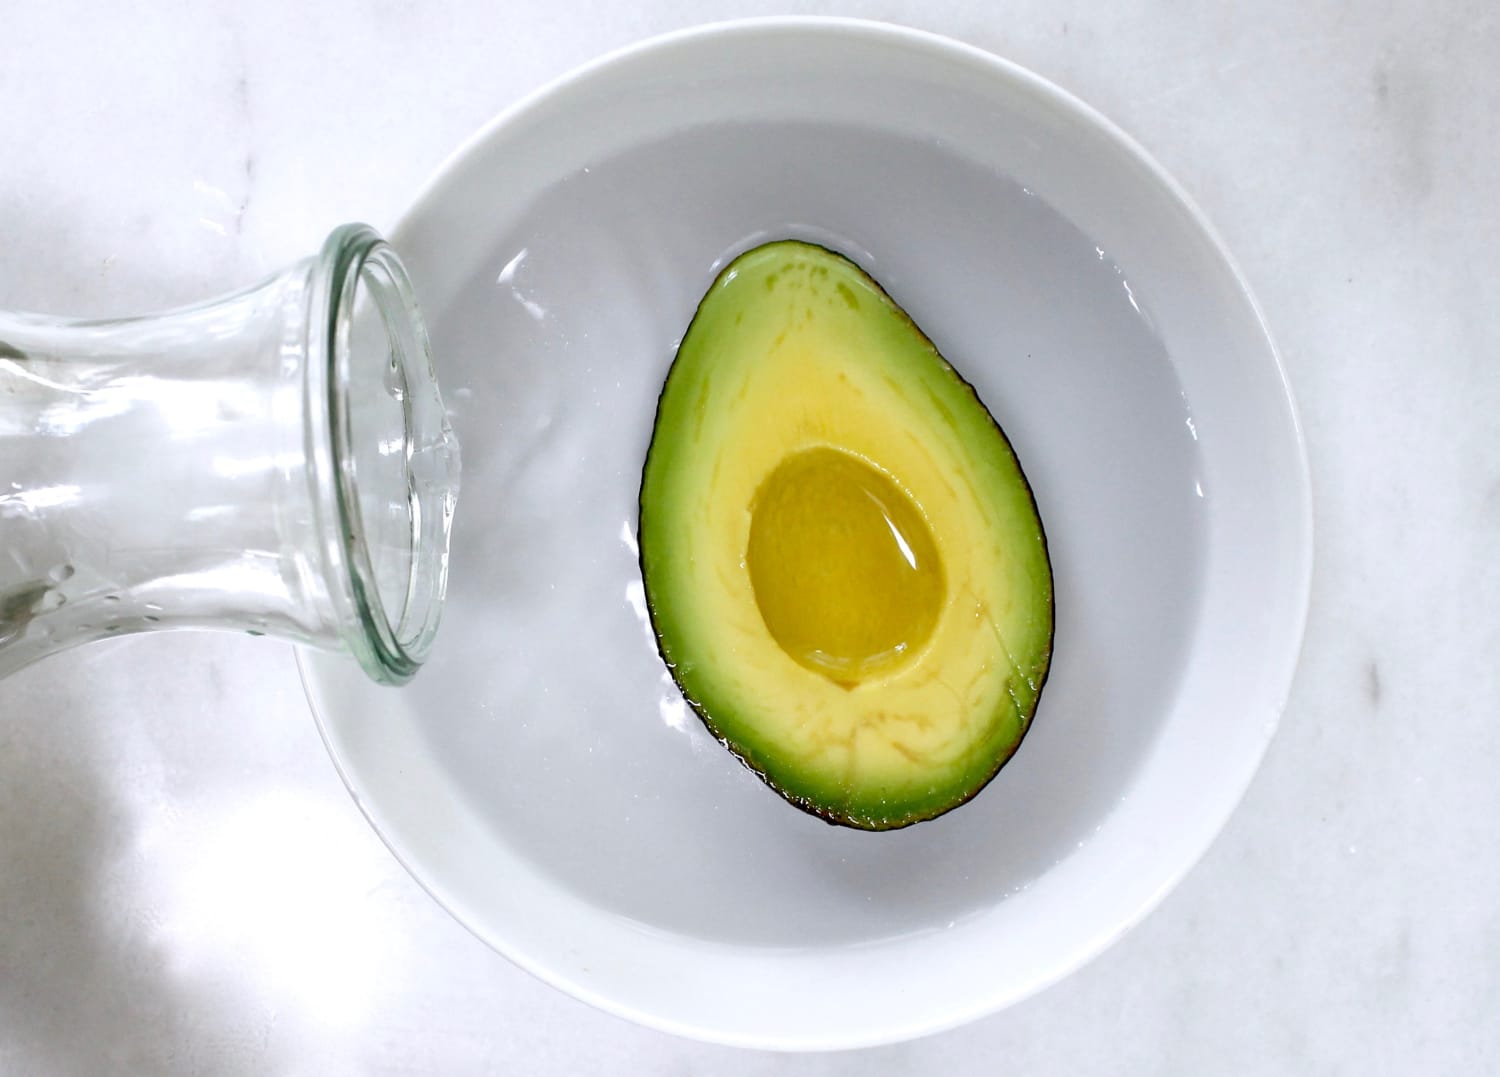 How to Keep an Avocado from Turning Brown